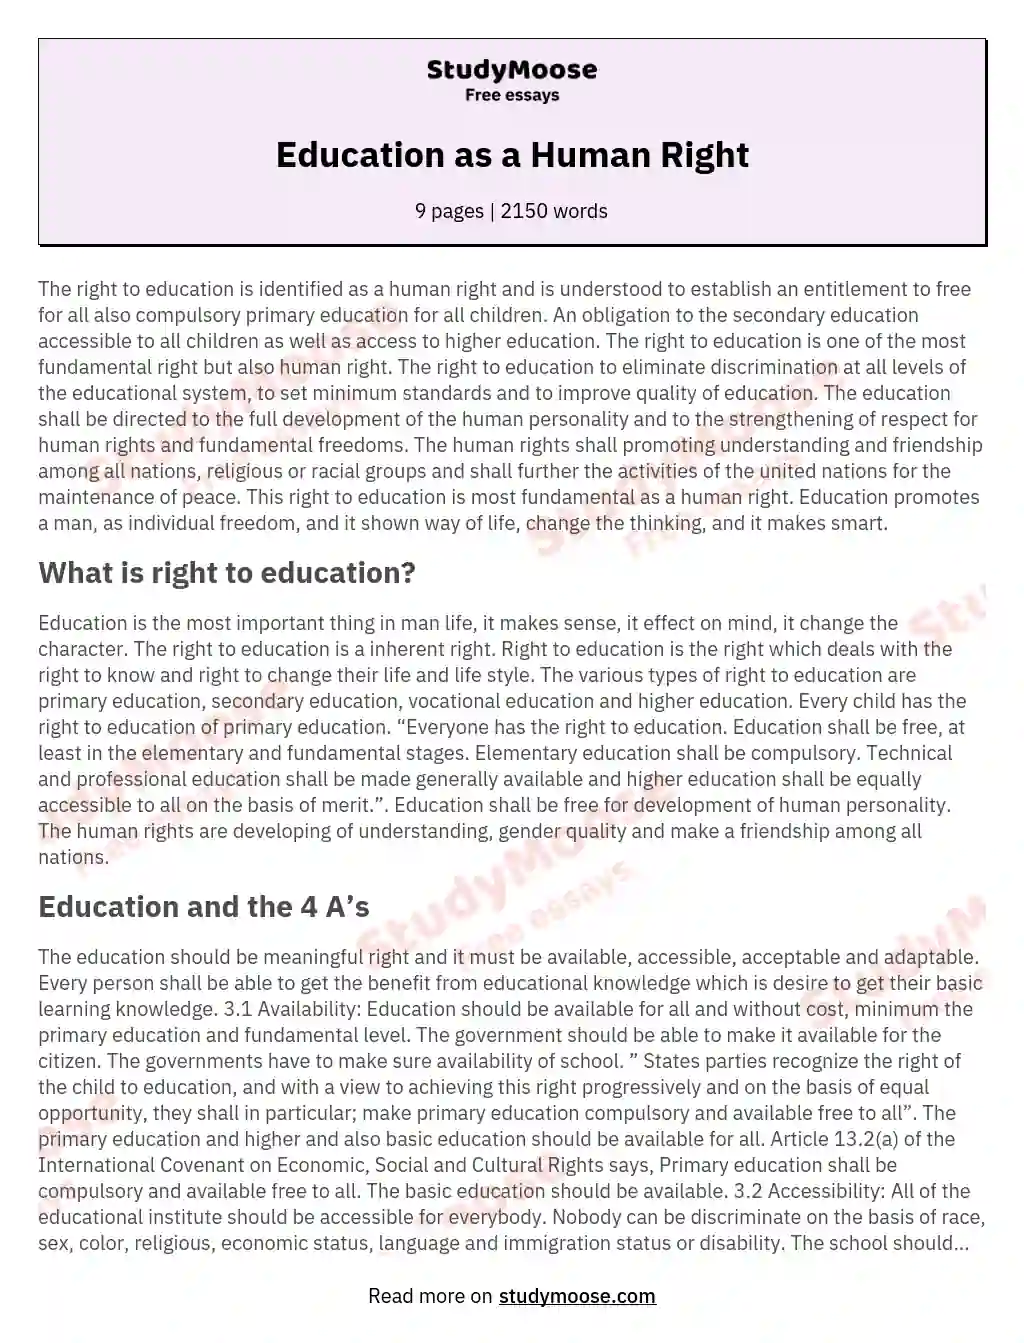 why education is a human right essay